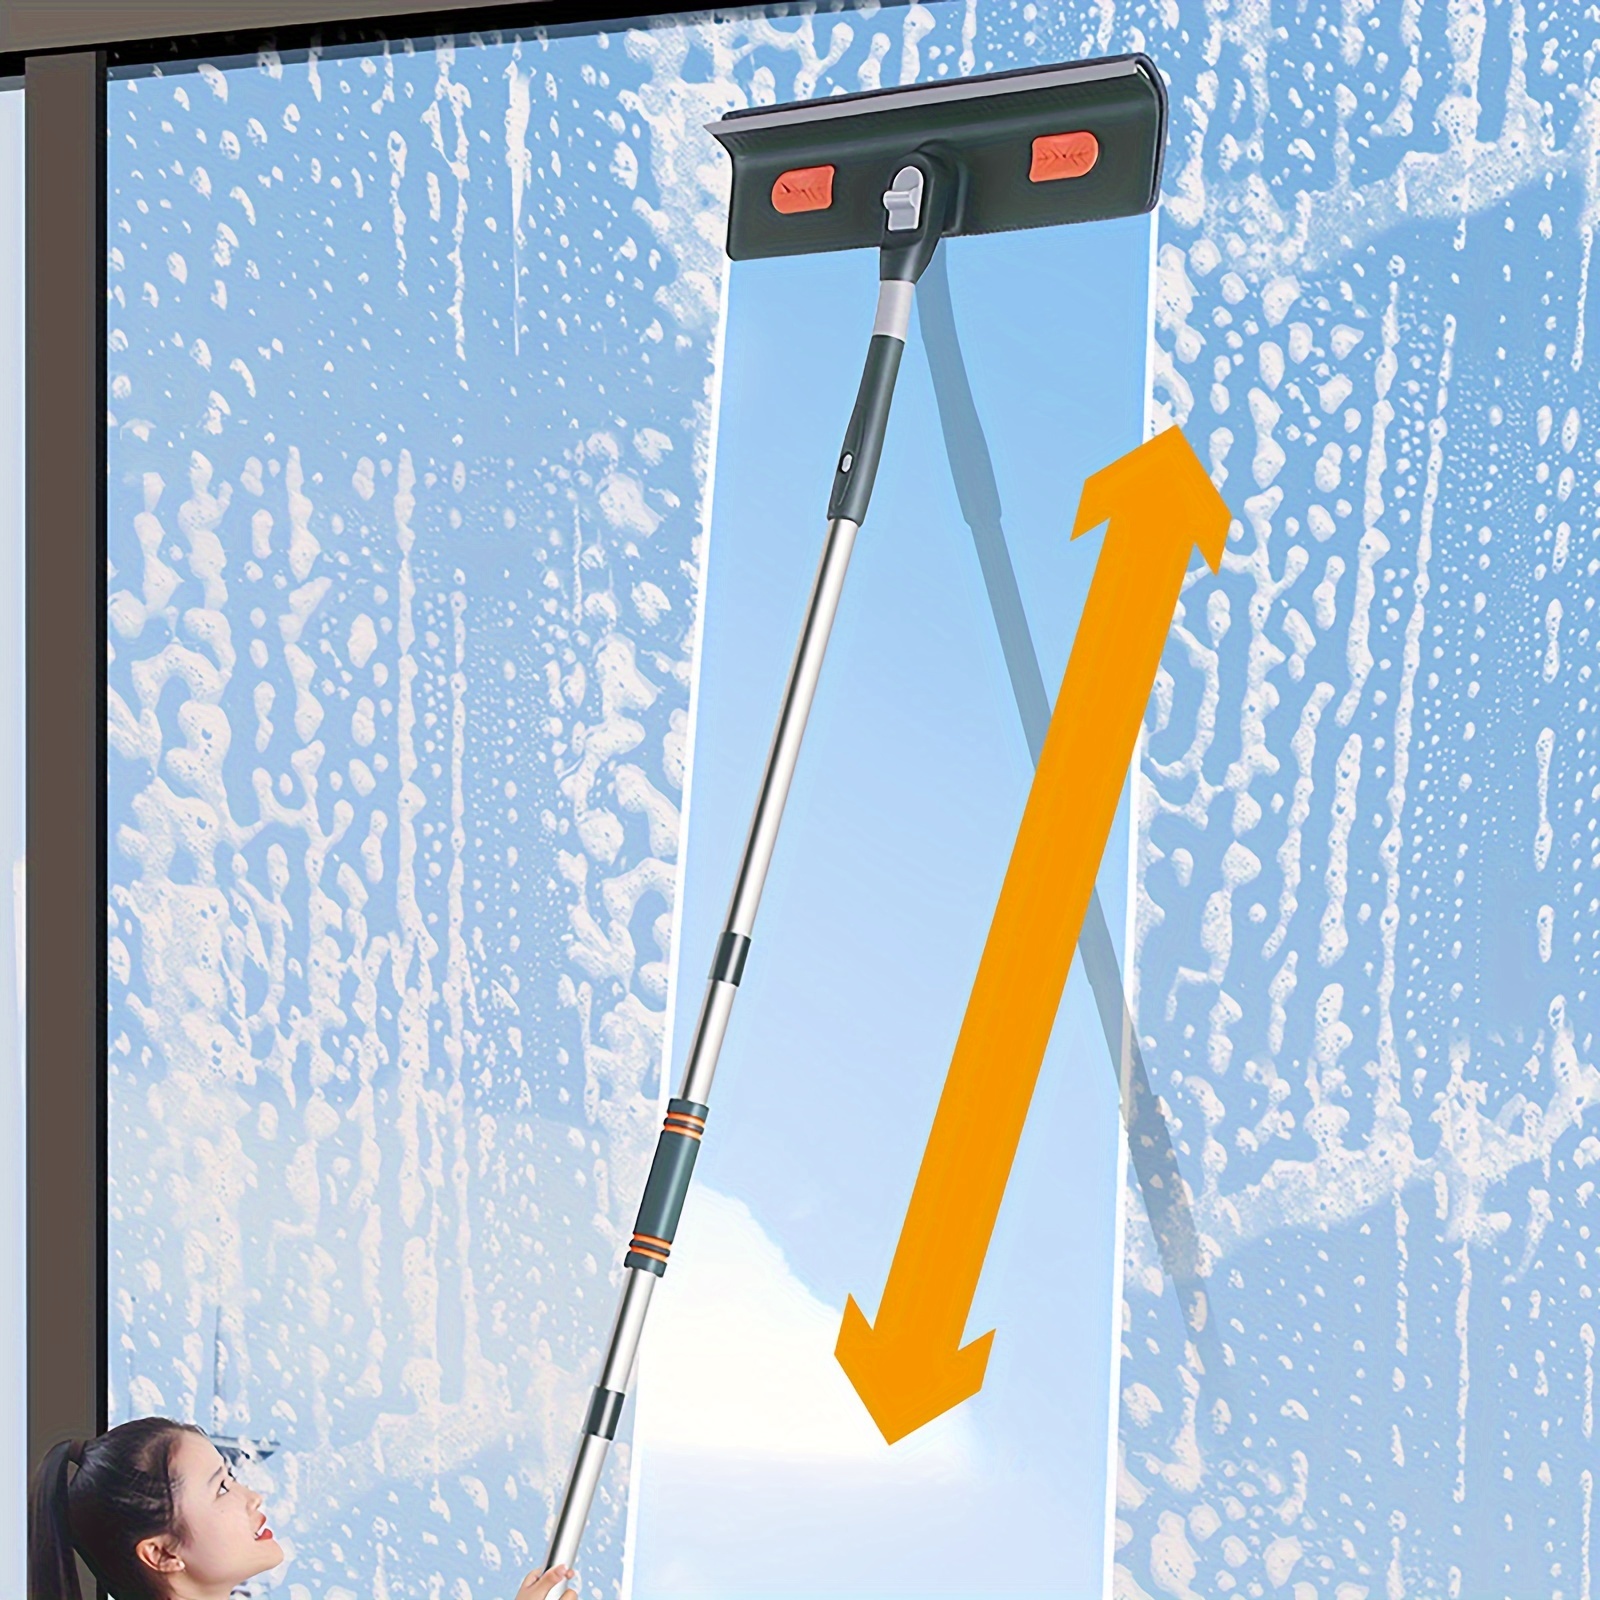 

Professional 2-in-1 Window Squeegee Cleaner Set With Extendable Pole, 89" - Bendable Head For Indoor/outdoor High Windows, No Batteries Required